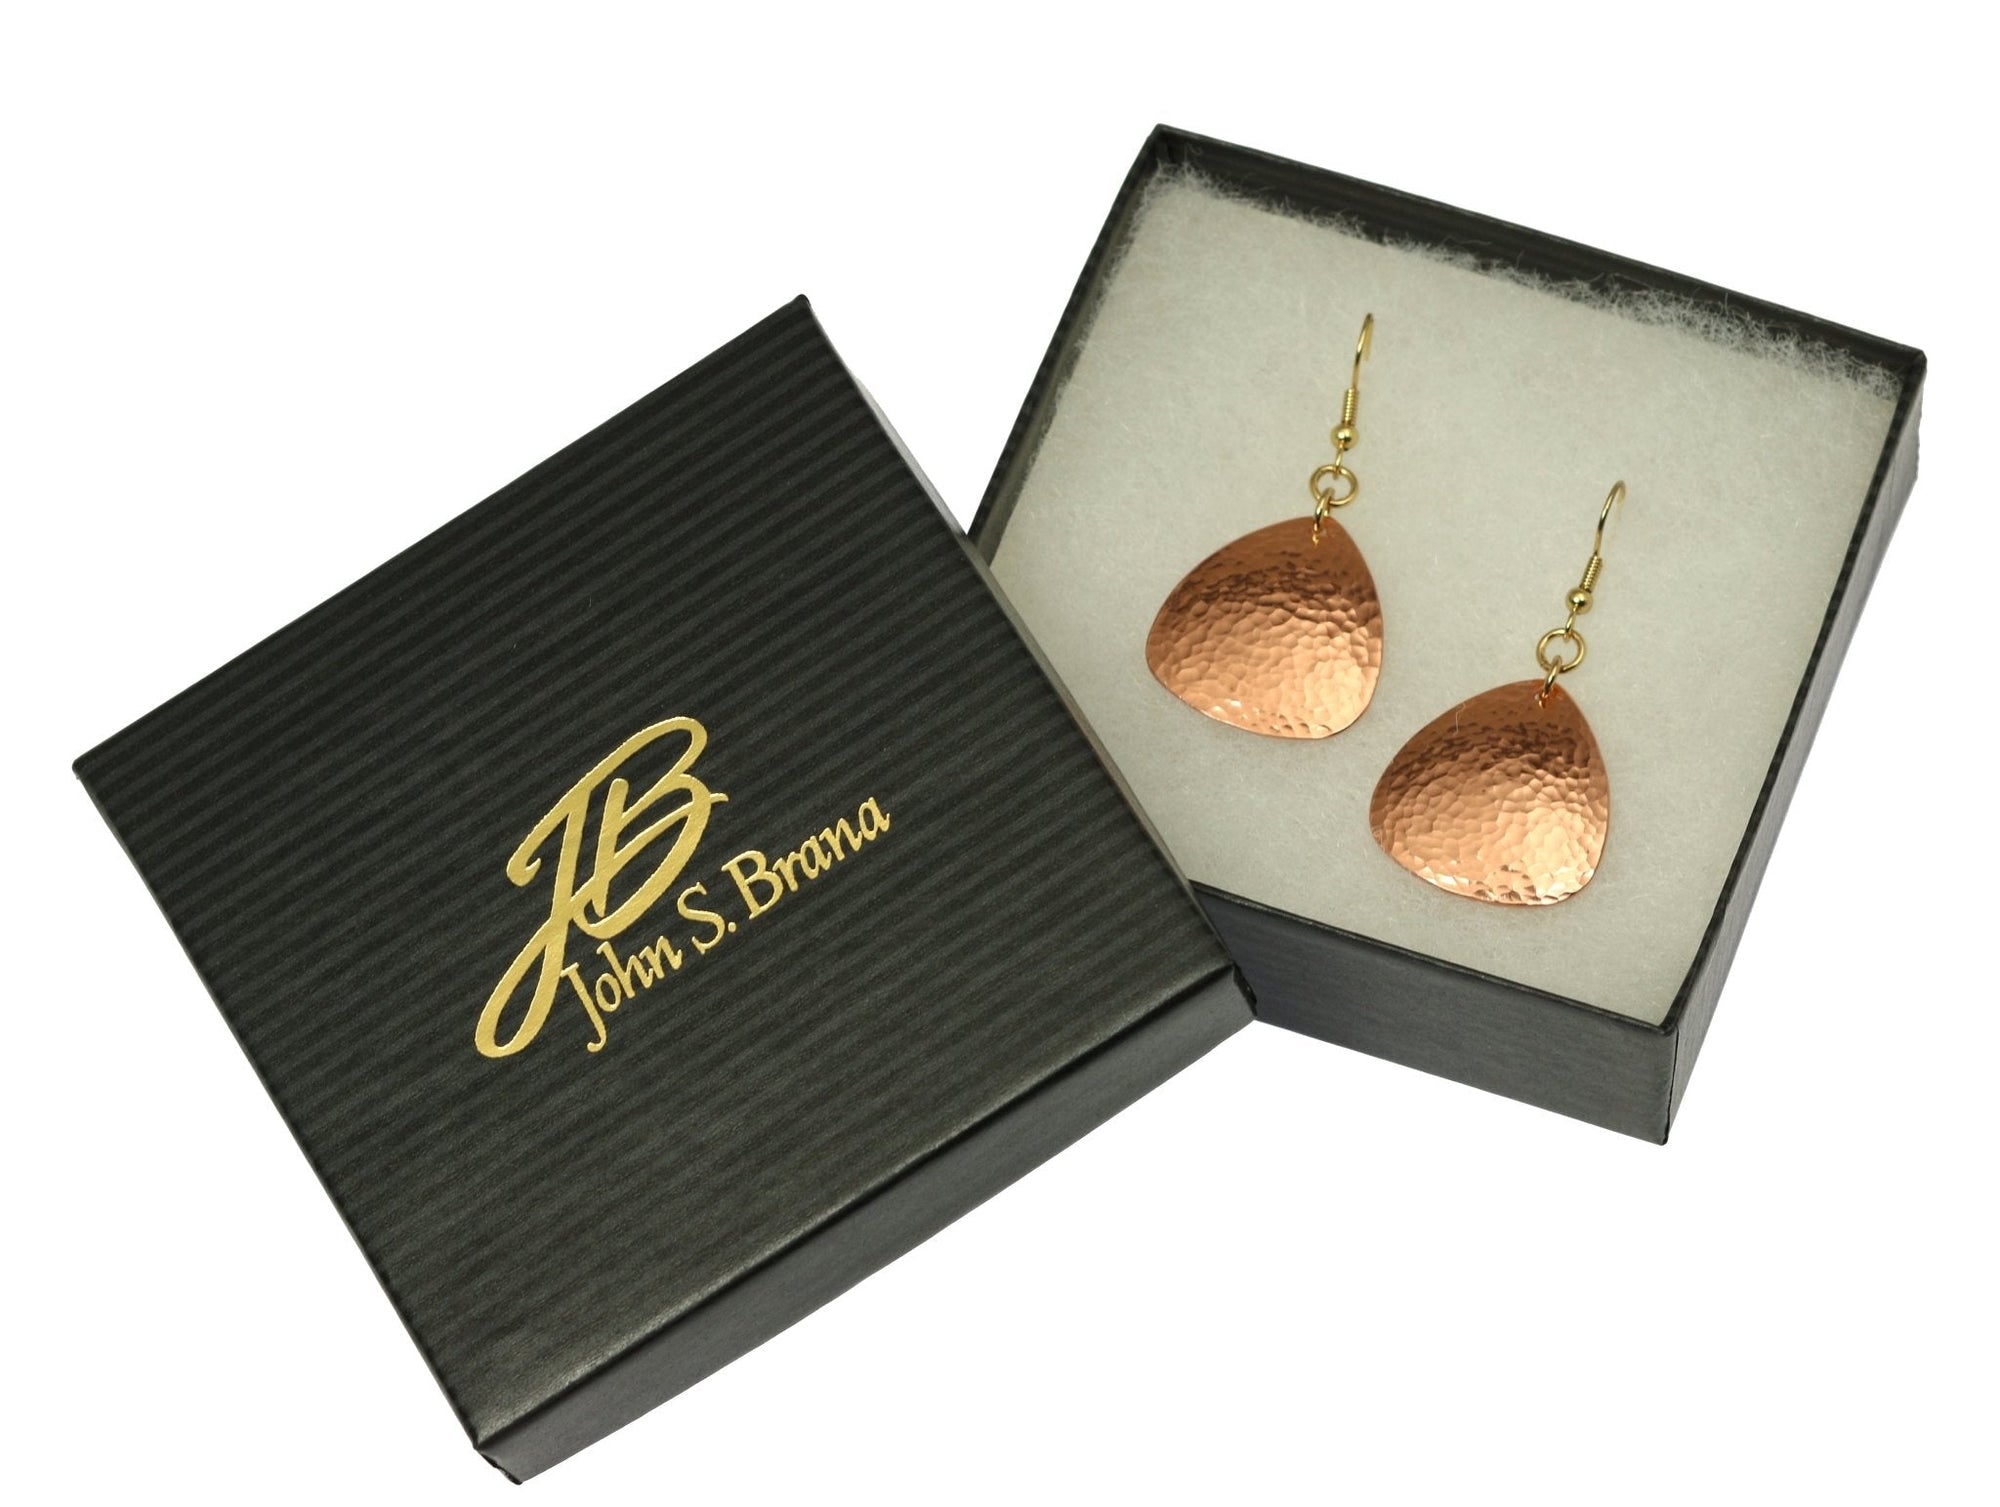 Hammered Copper Triangular Drop Earrings in a Gift Box